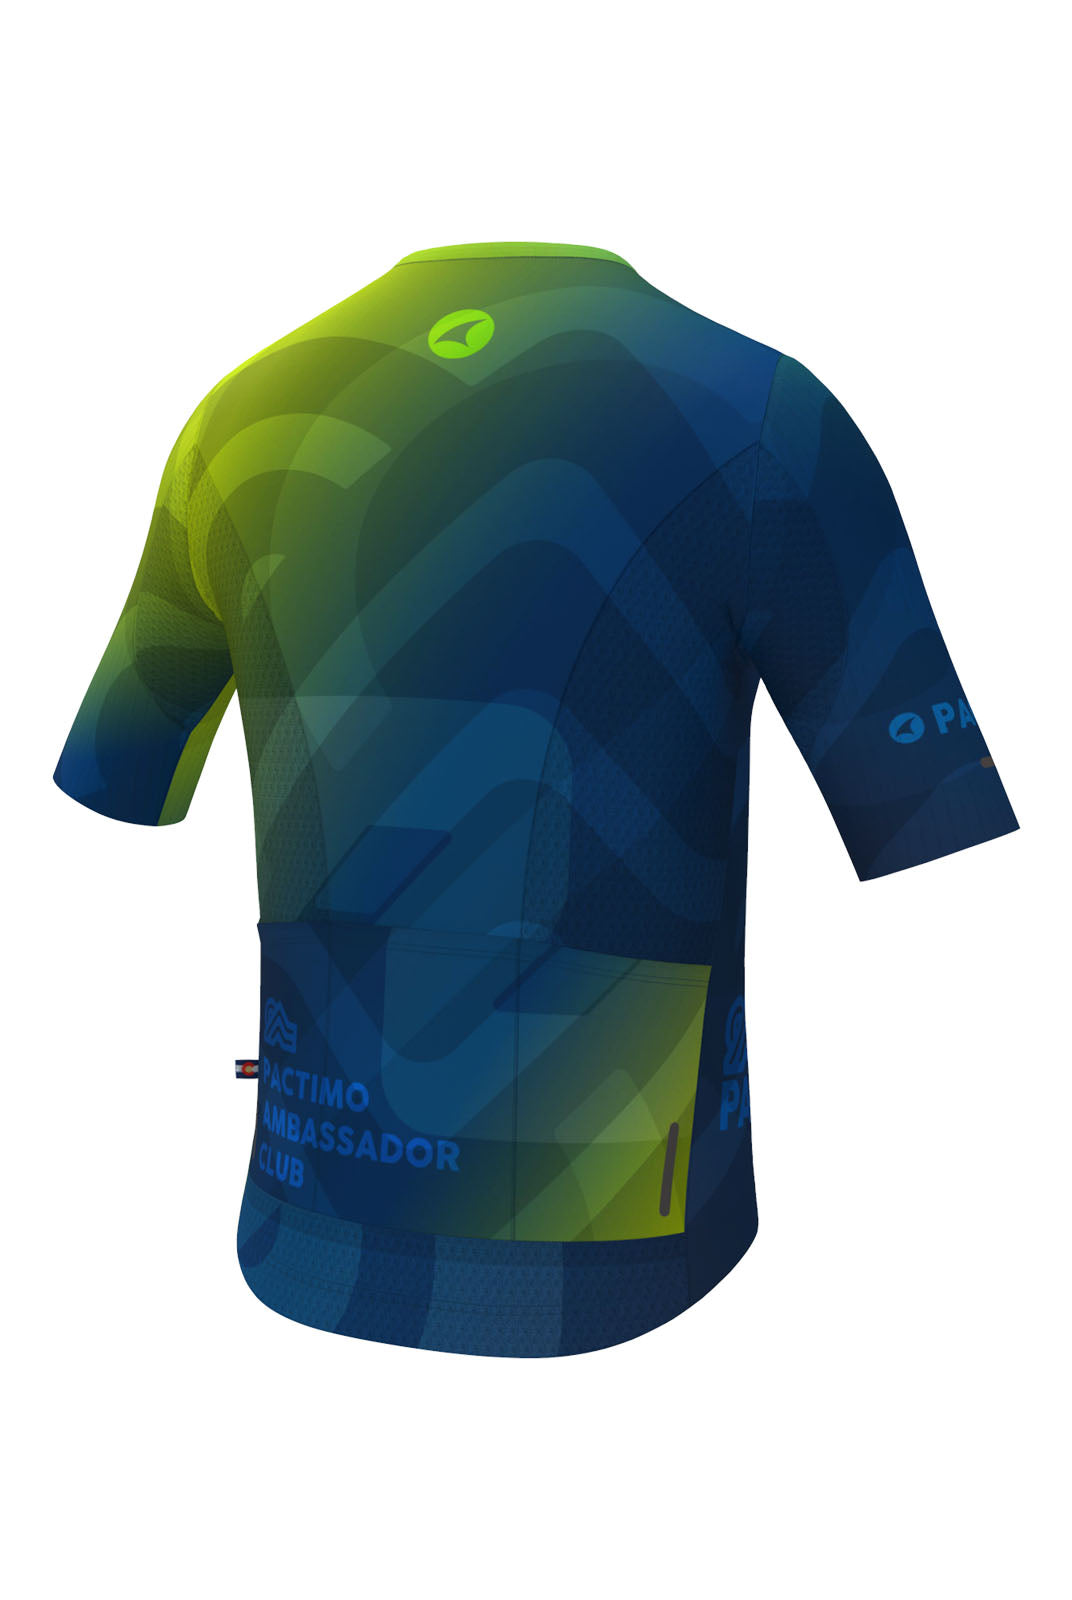 Men's PAC Flyte Cycling Jersey - Cool Fade Back View